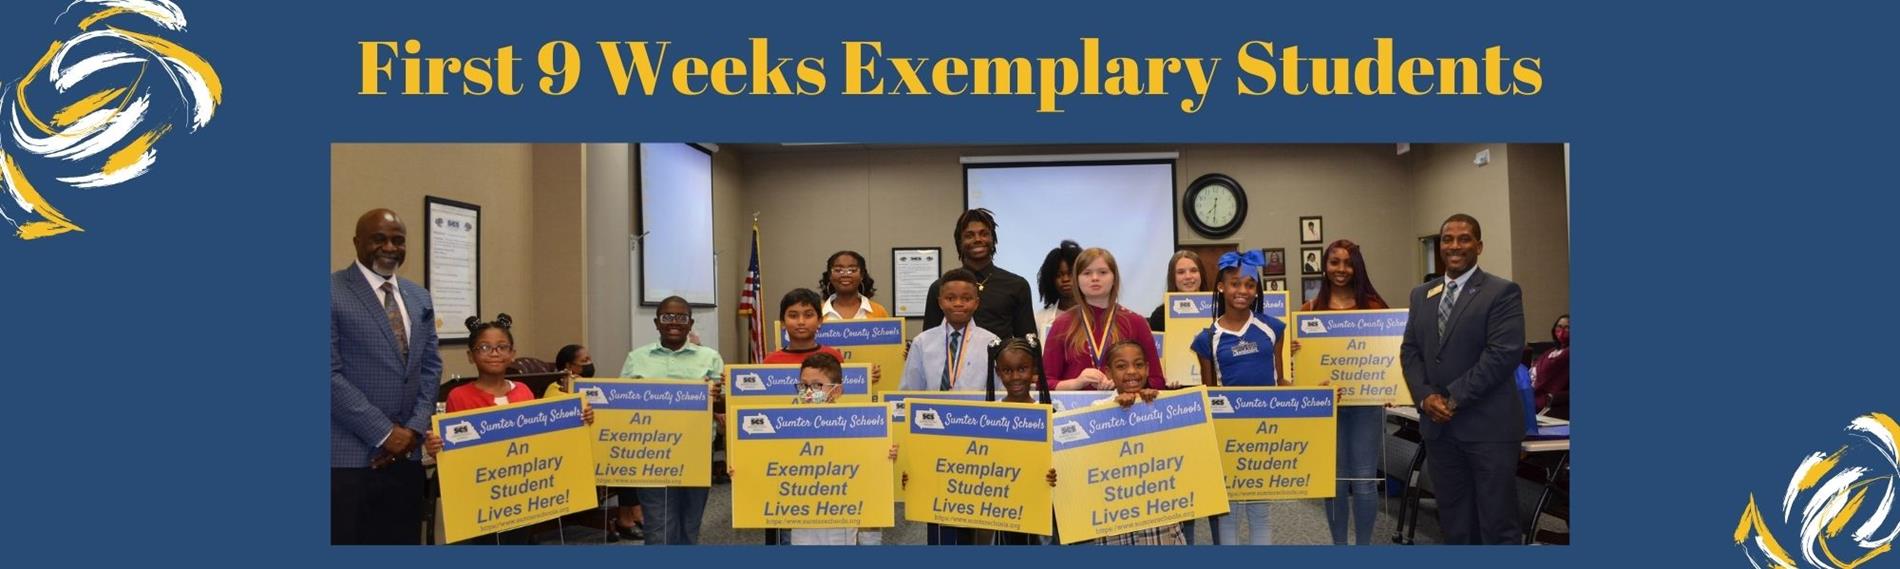 1st 9 Weeks Exemplary Students 